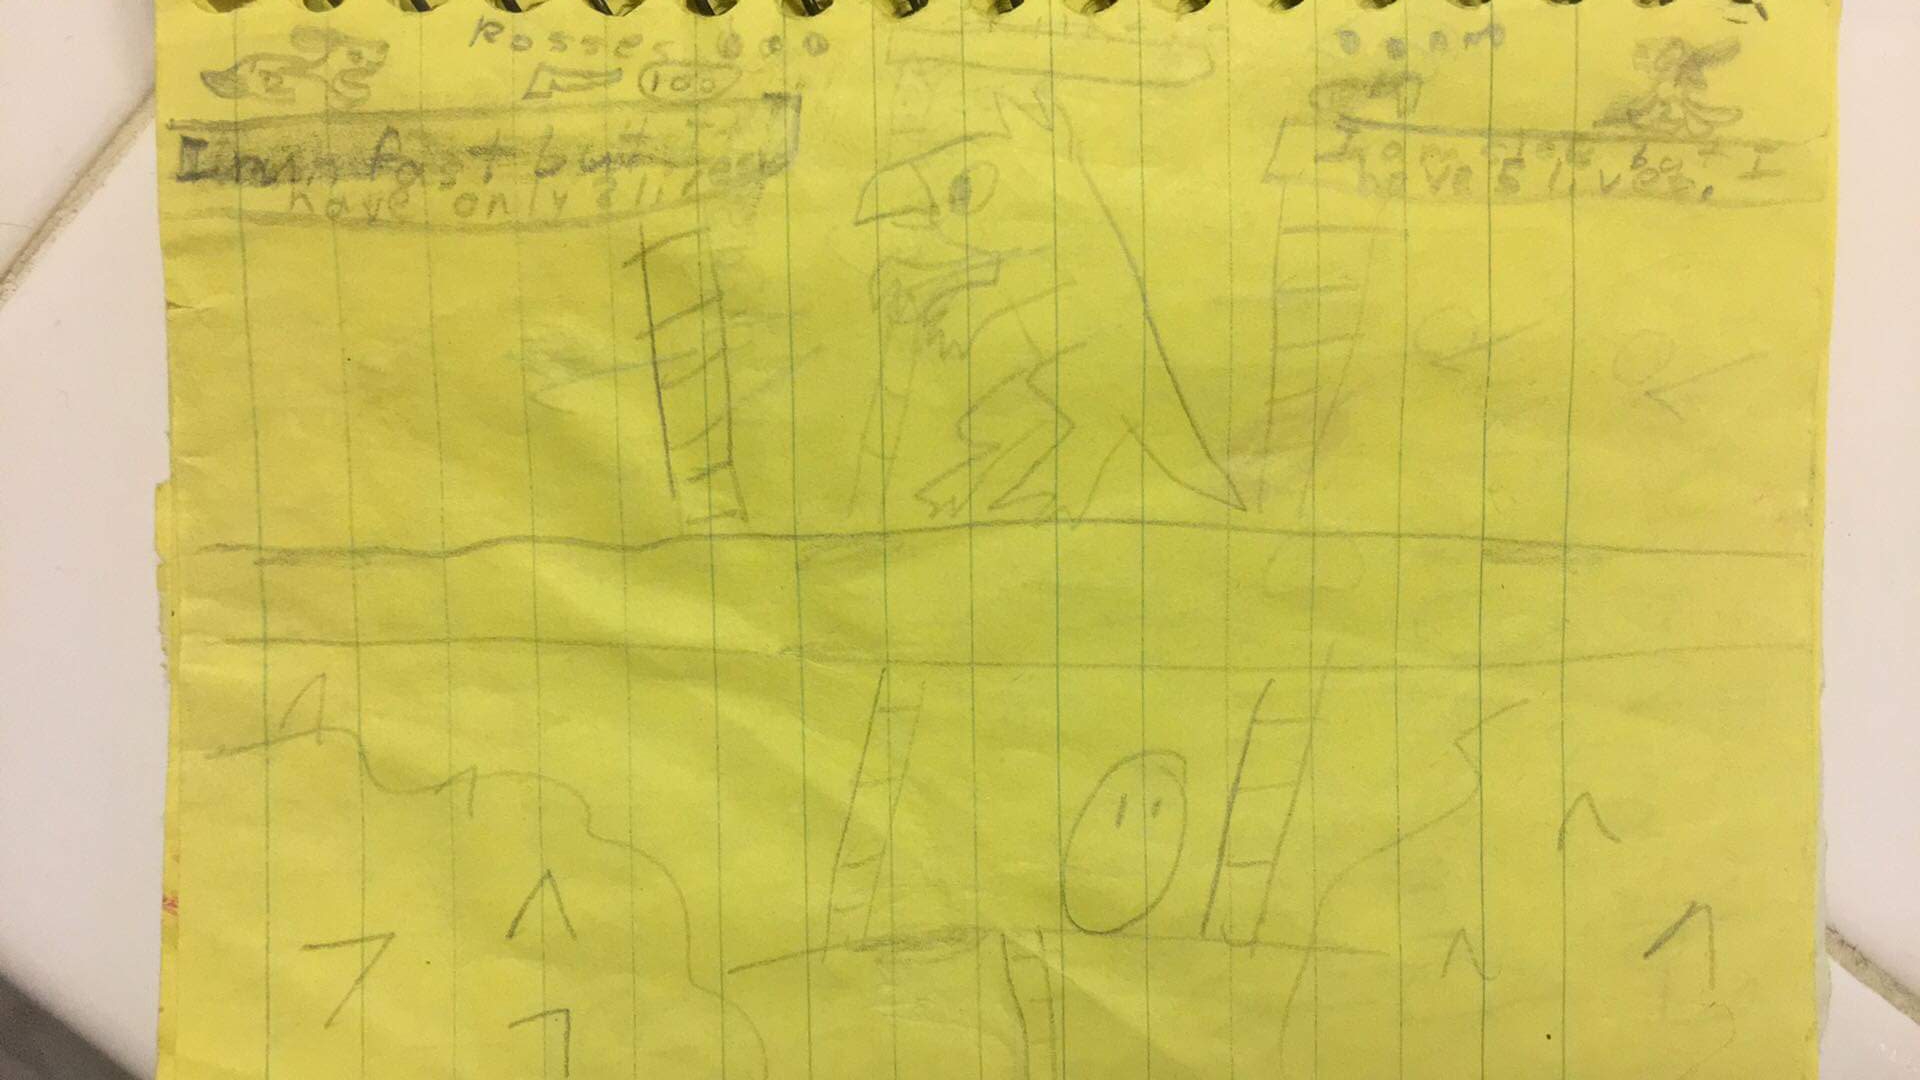 A yellow page in a notebook featuring a child's drawing of a made-up video game.